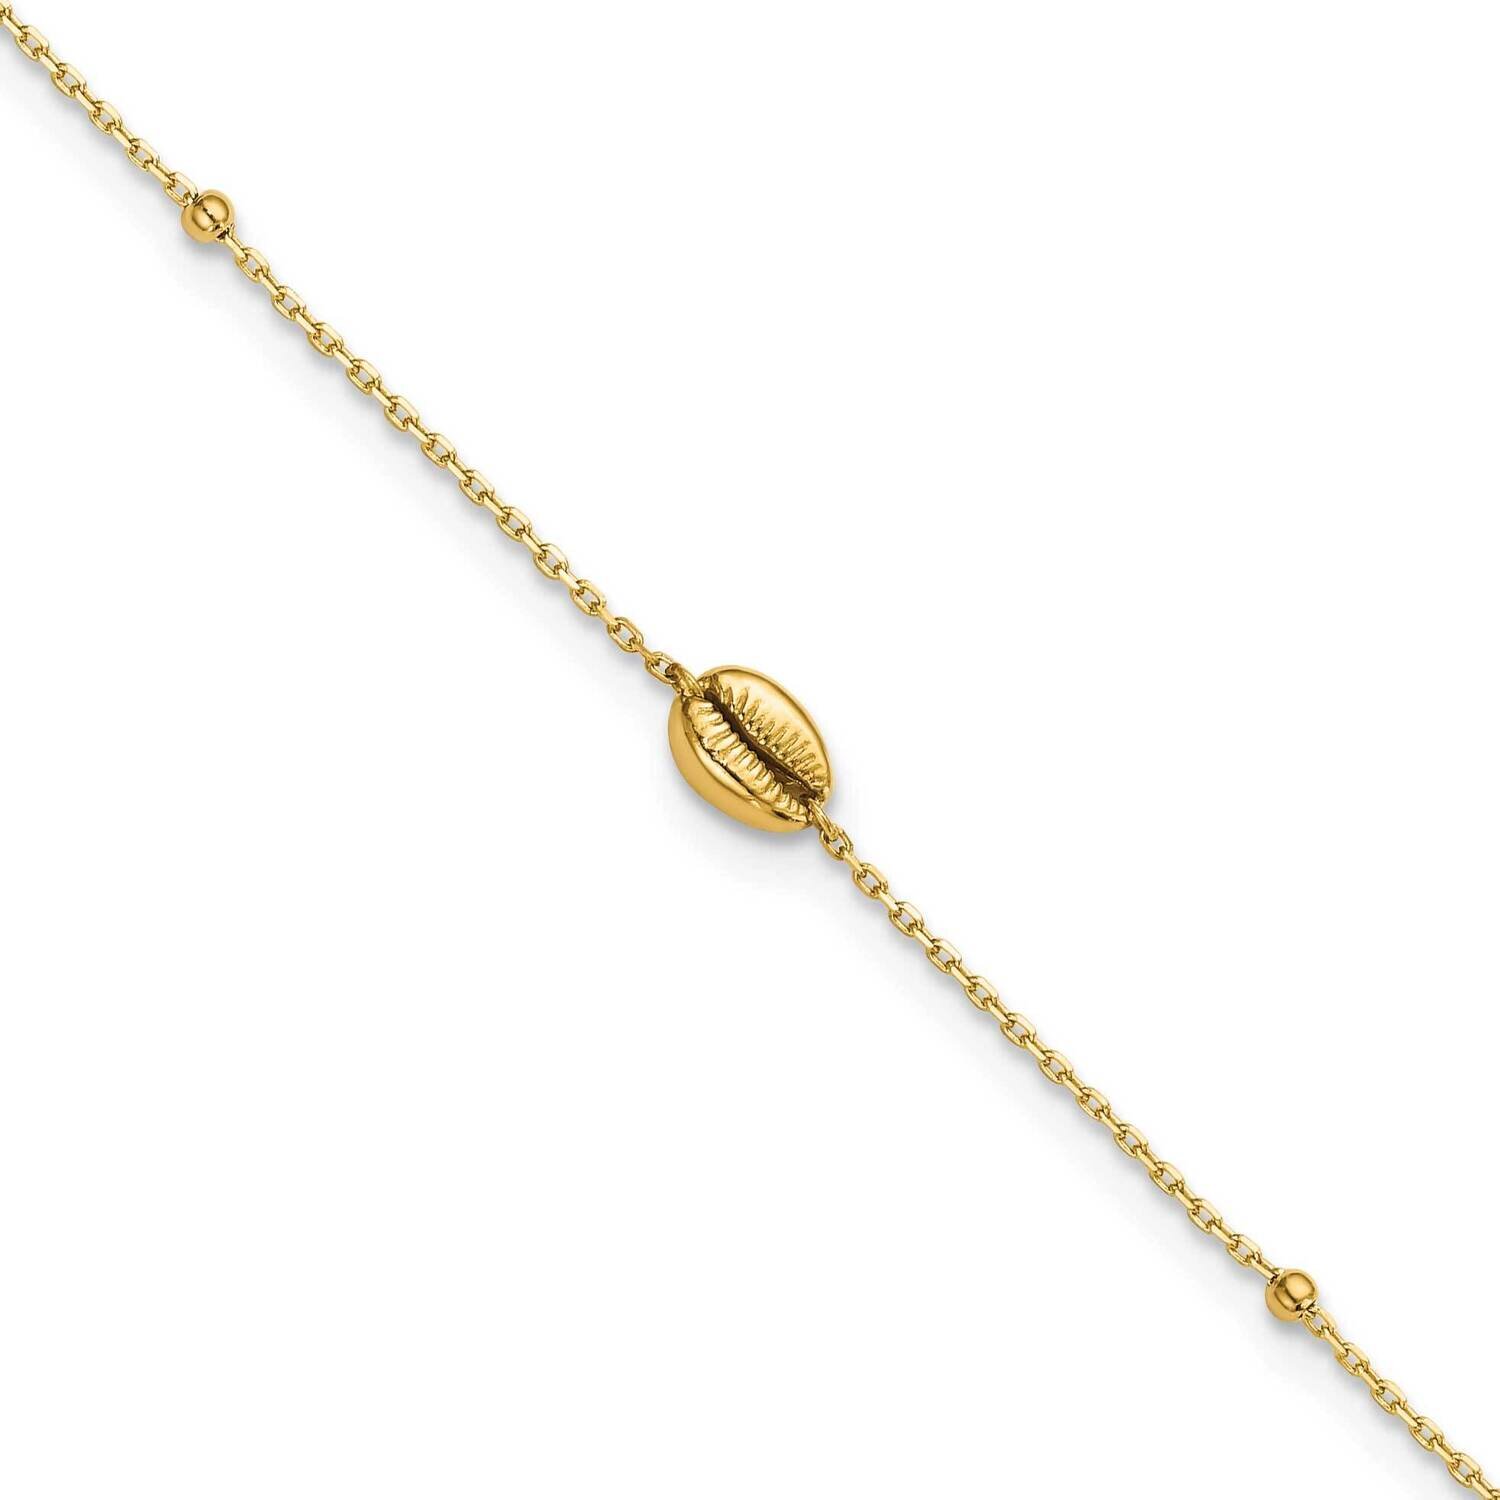 Shell and Bead 9 Inch Plus 1 Inch Extender Anklet 14k Gold Polished ANK324-9